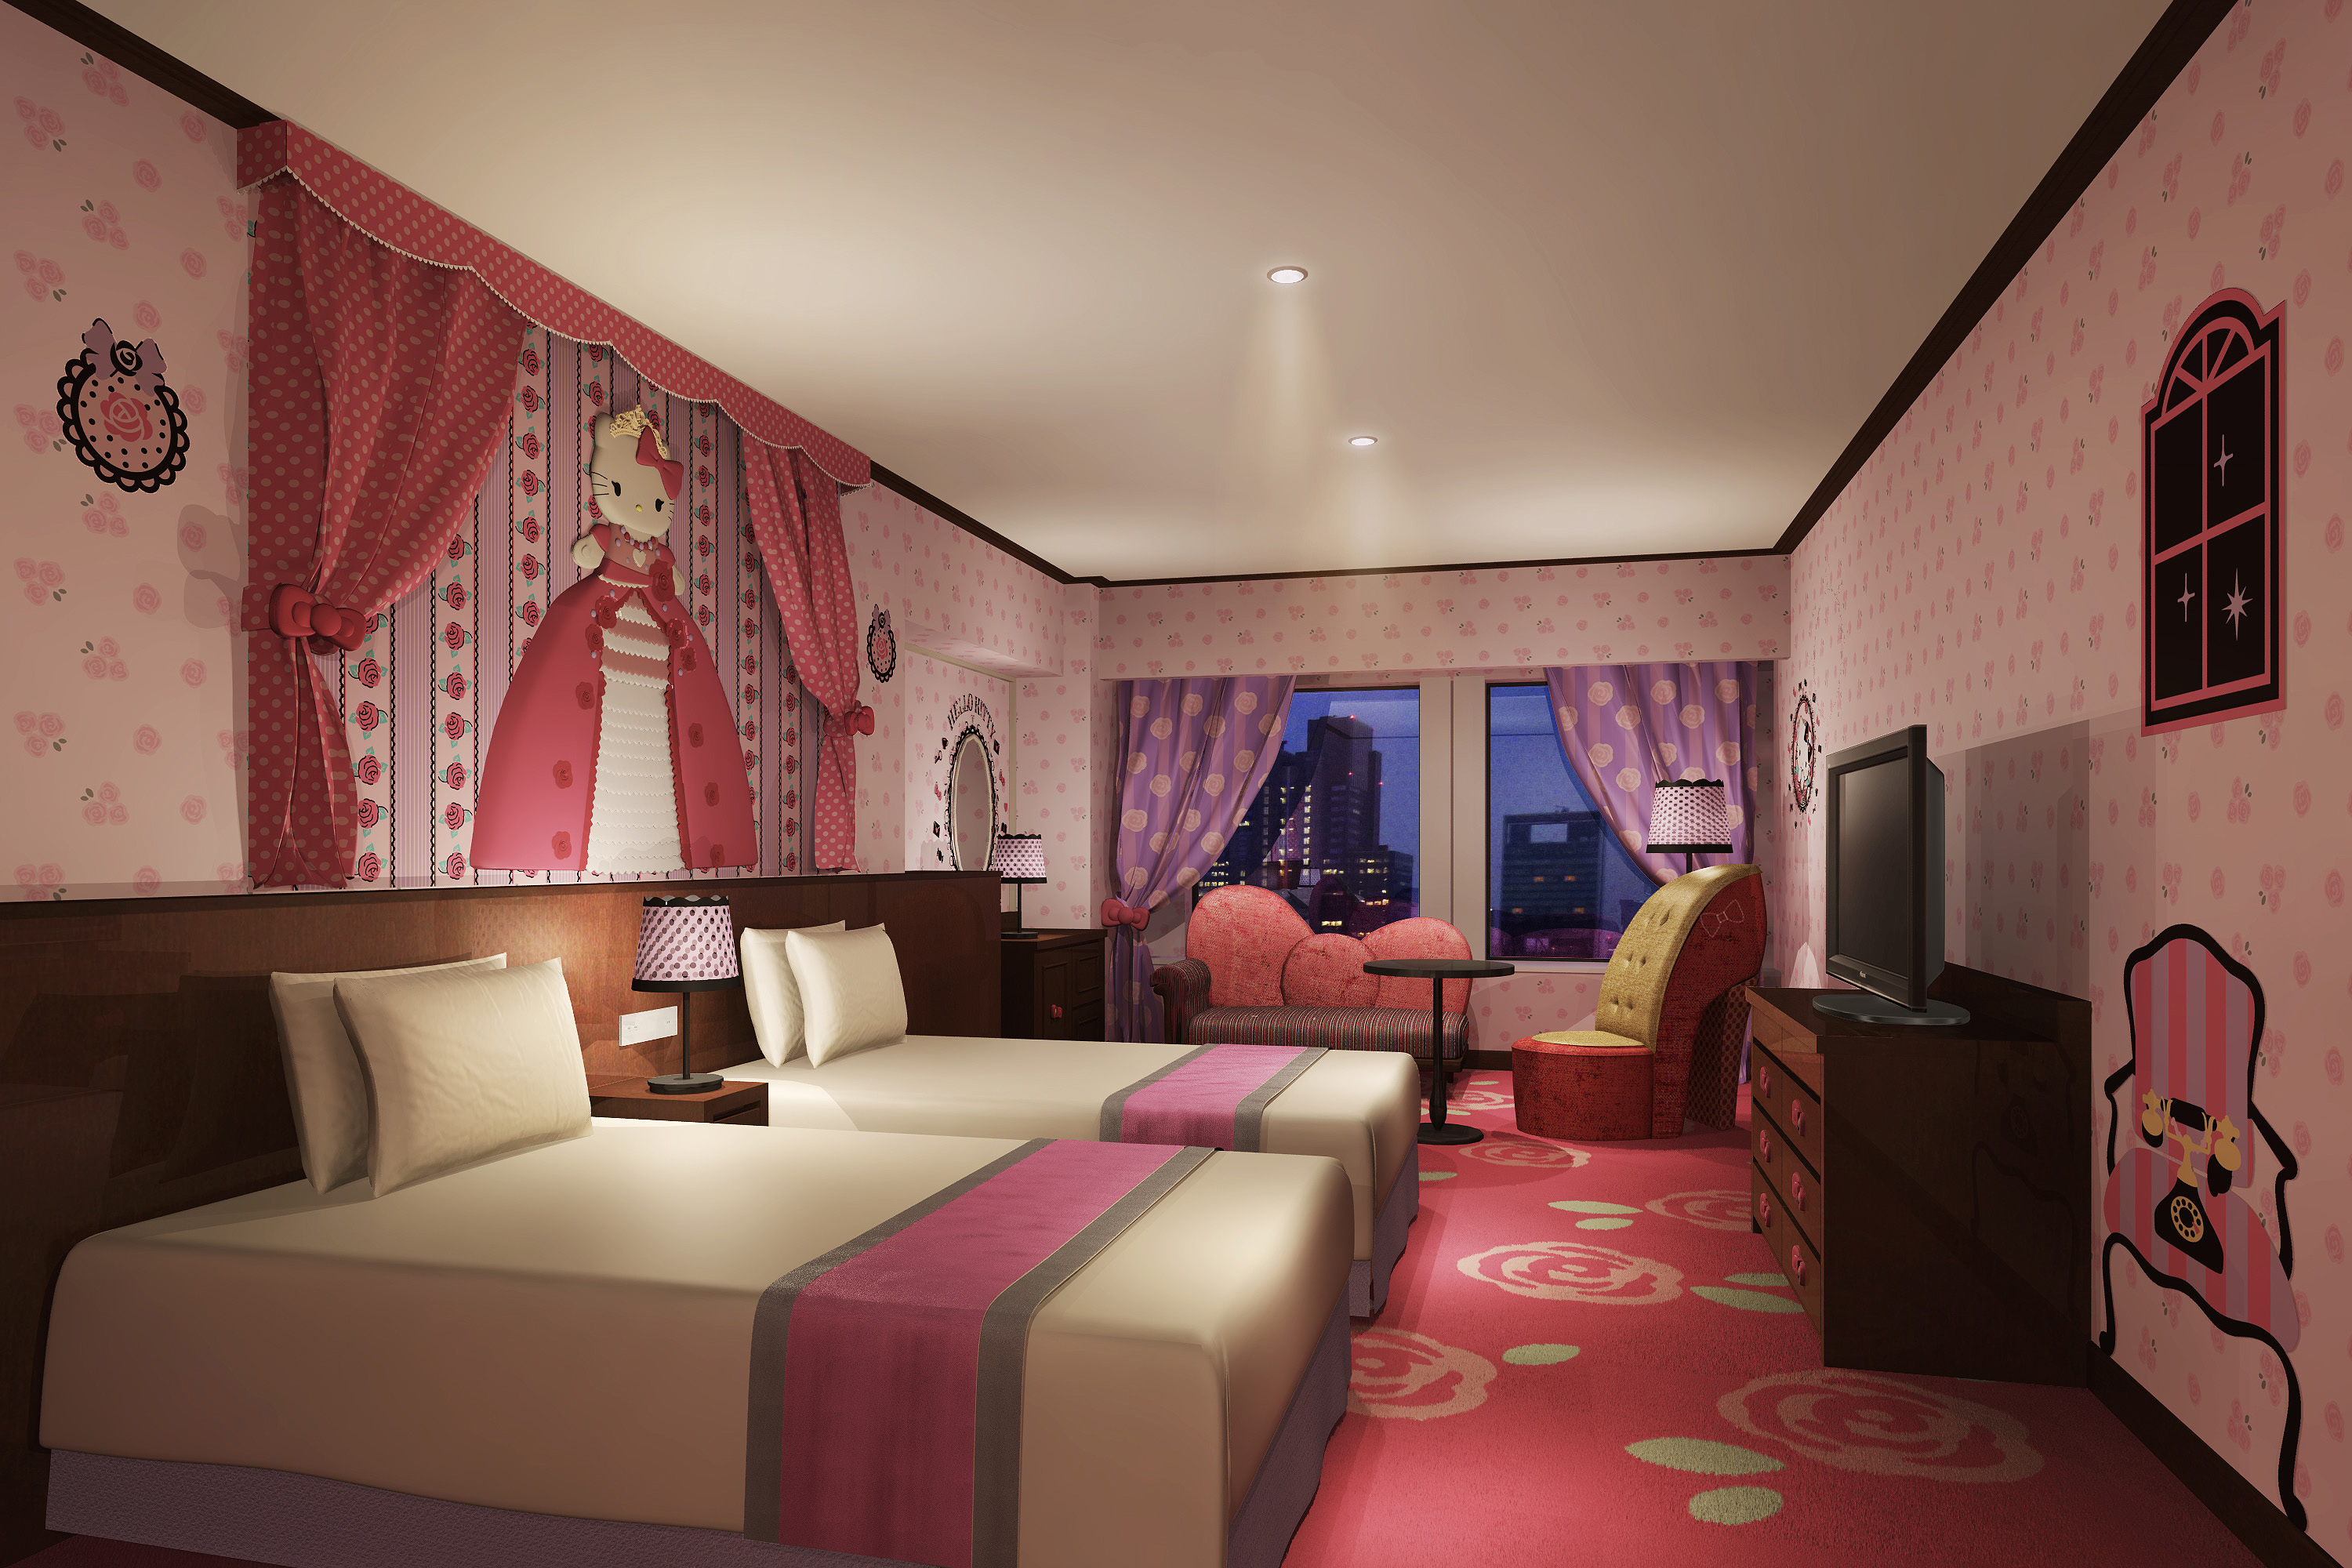 Keio Plaza Hotel Starts Hello Kitty Rooms  Business Wire